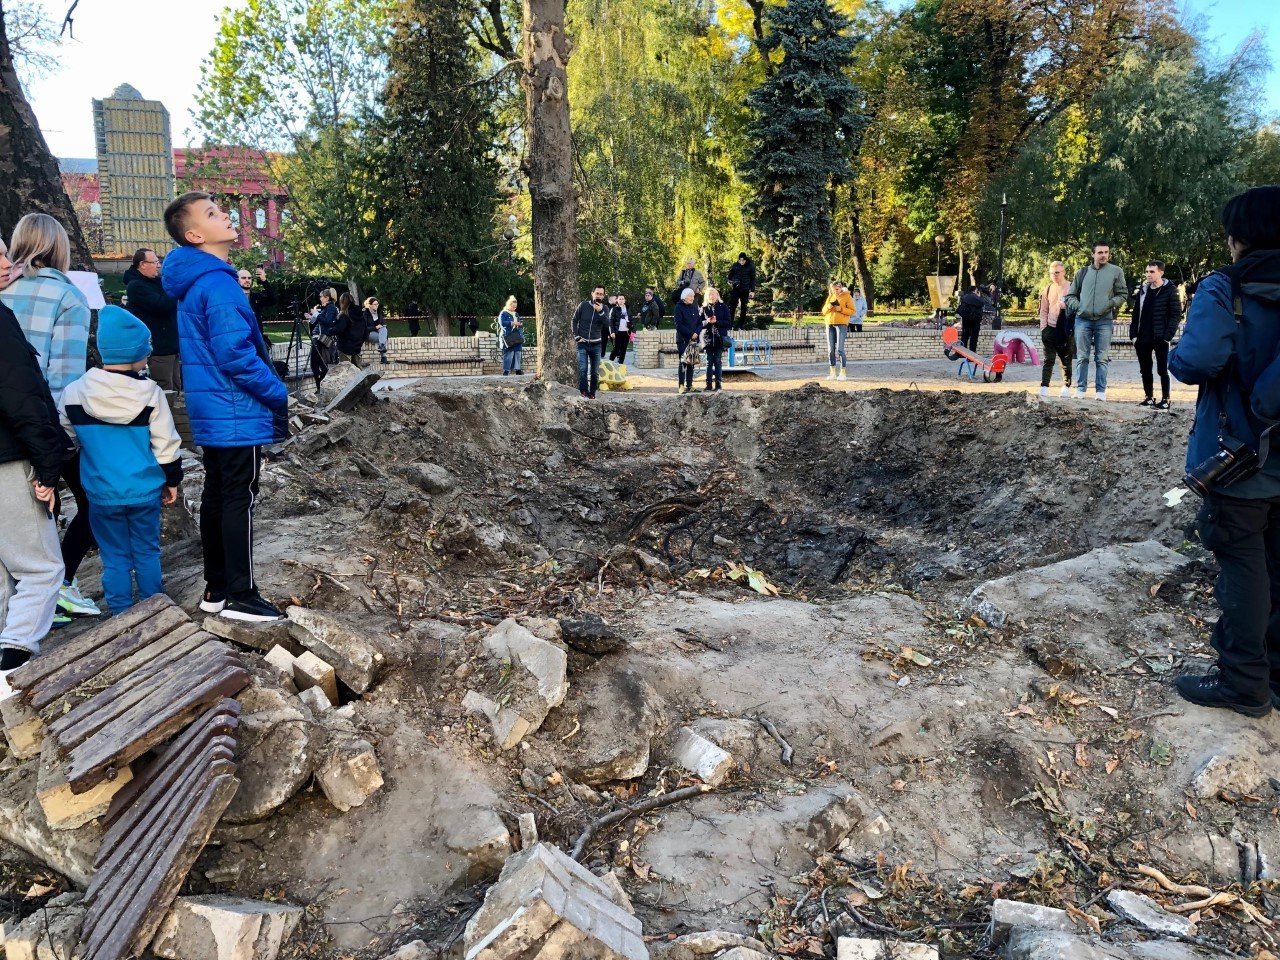 The crater left by a Russian missile, which hit a playground in Kyiv's Shevchenko Park on Oct. 10, 2022. Photo by Nolan Peterson/Coffee or Die.